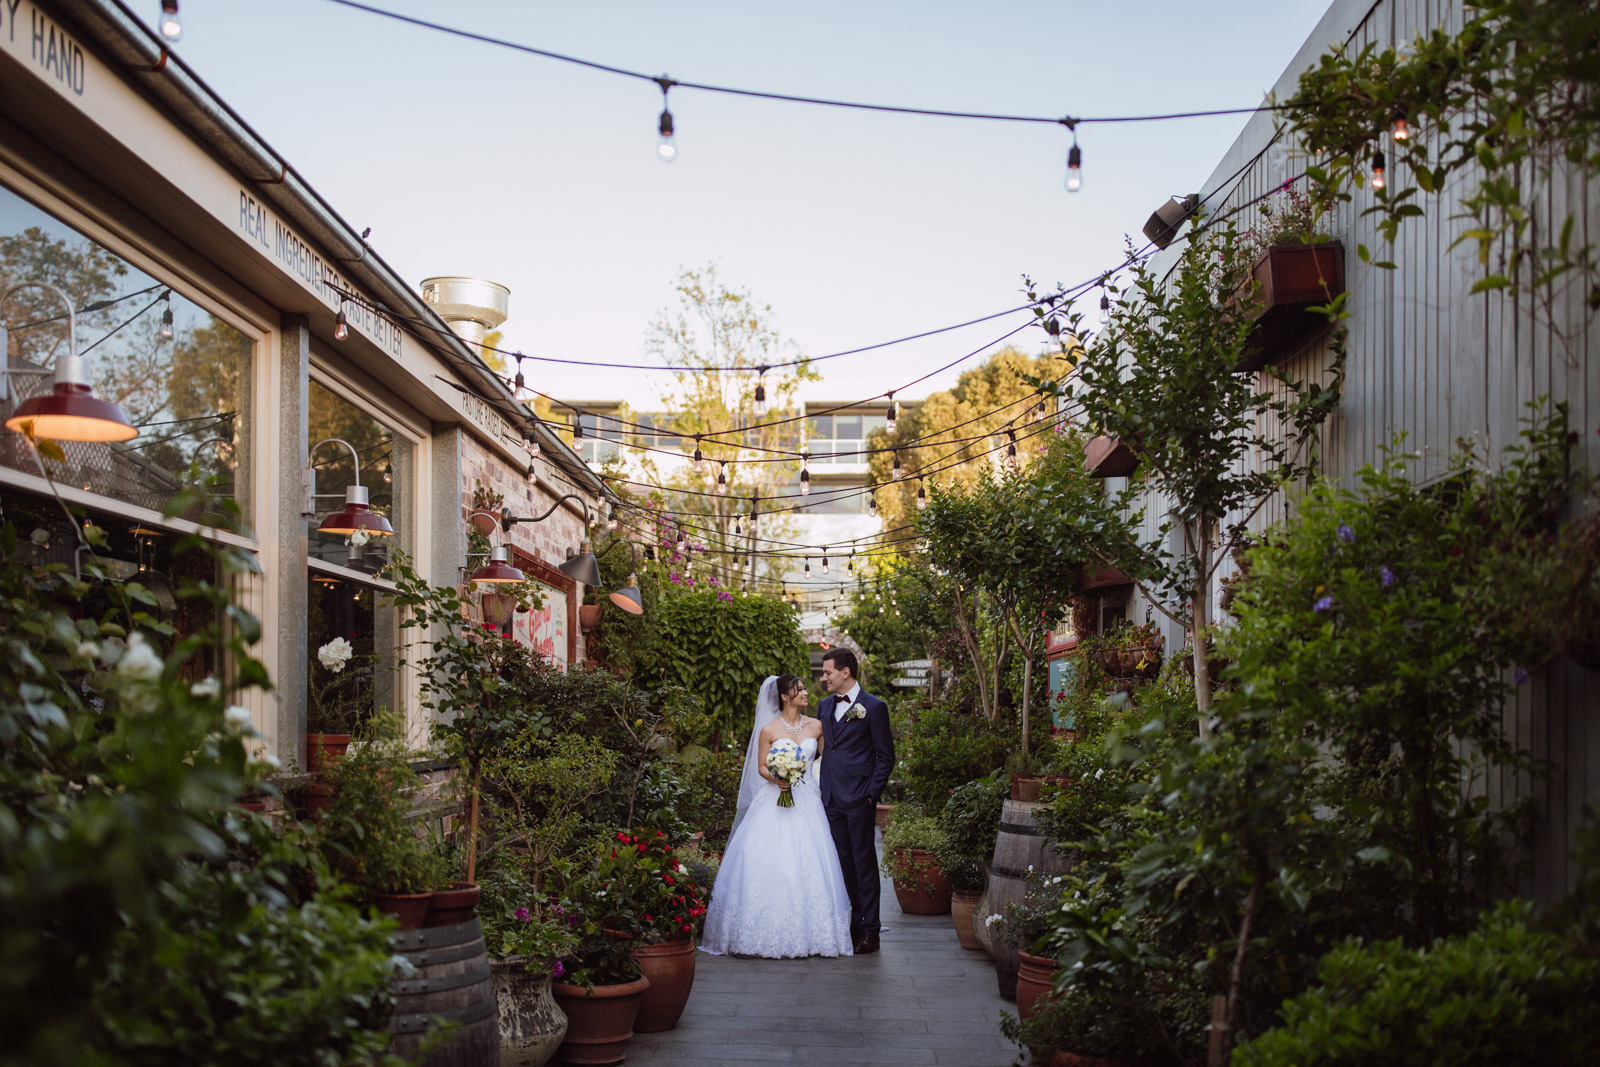 A man and woman on their wedding day in a narrow alley lined with a lot of pot plants. Light bulbs hang from power lines strung across the two buildings on either side. The man and woman are looking at each other and smiling. The woman is wearing a white strapless ballgown and a white veil, and is holding a bouquet of ivory and blue flowers. The man is wearing a navy blue suit